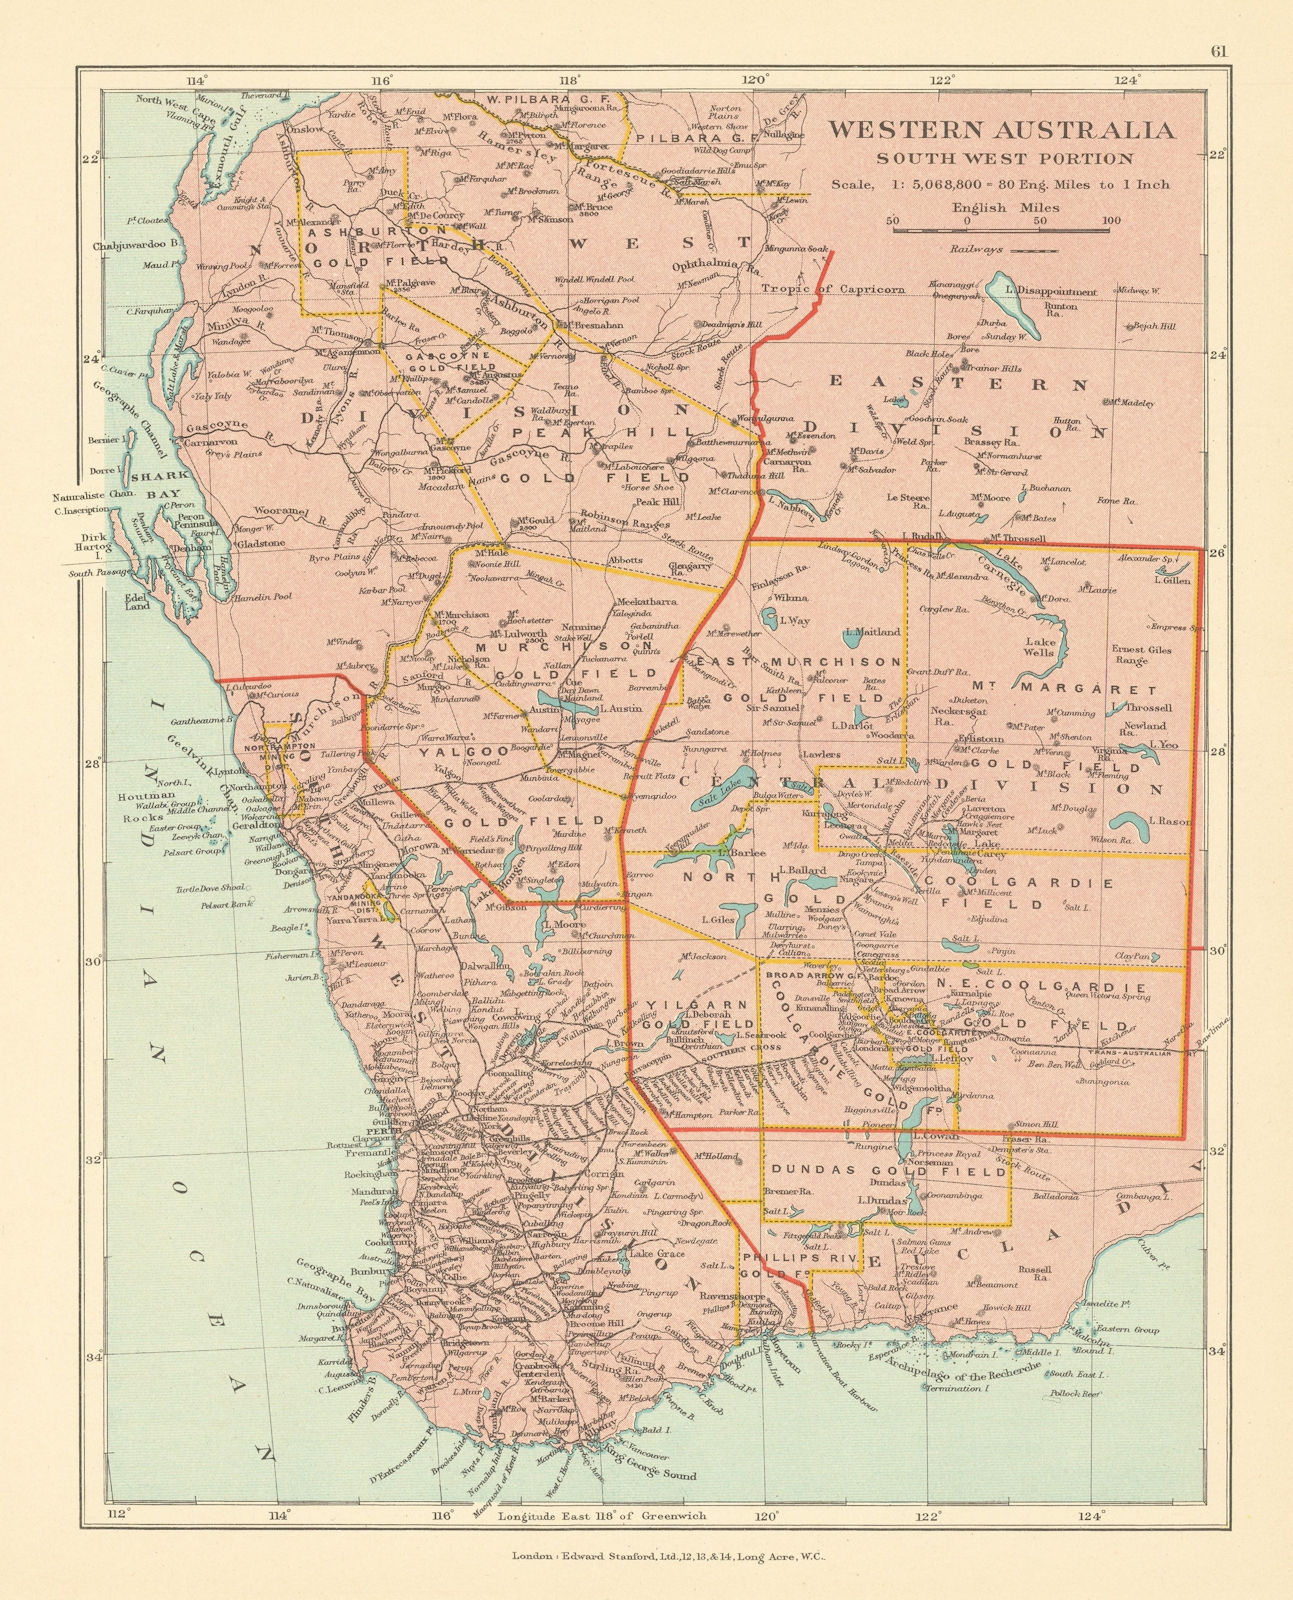 Western Australia, South-West Portion. Goldfields. Perth. STANFORD c1925 map